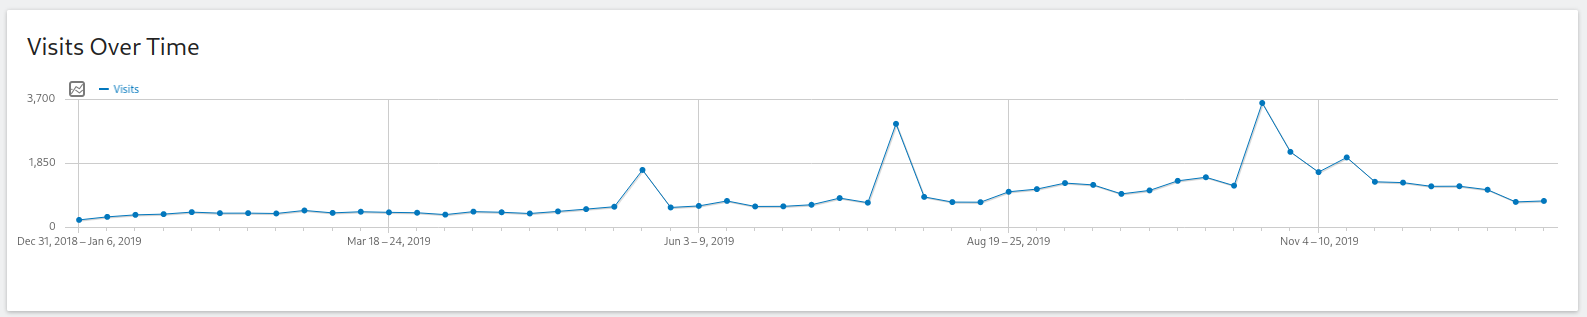 Screenshot of the Matomo "Visits over time" view showing the year's traffic